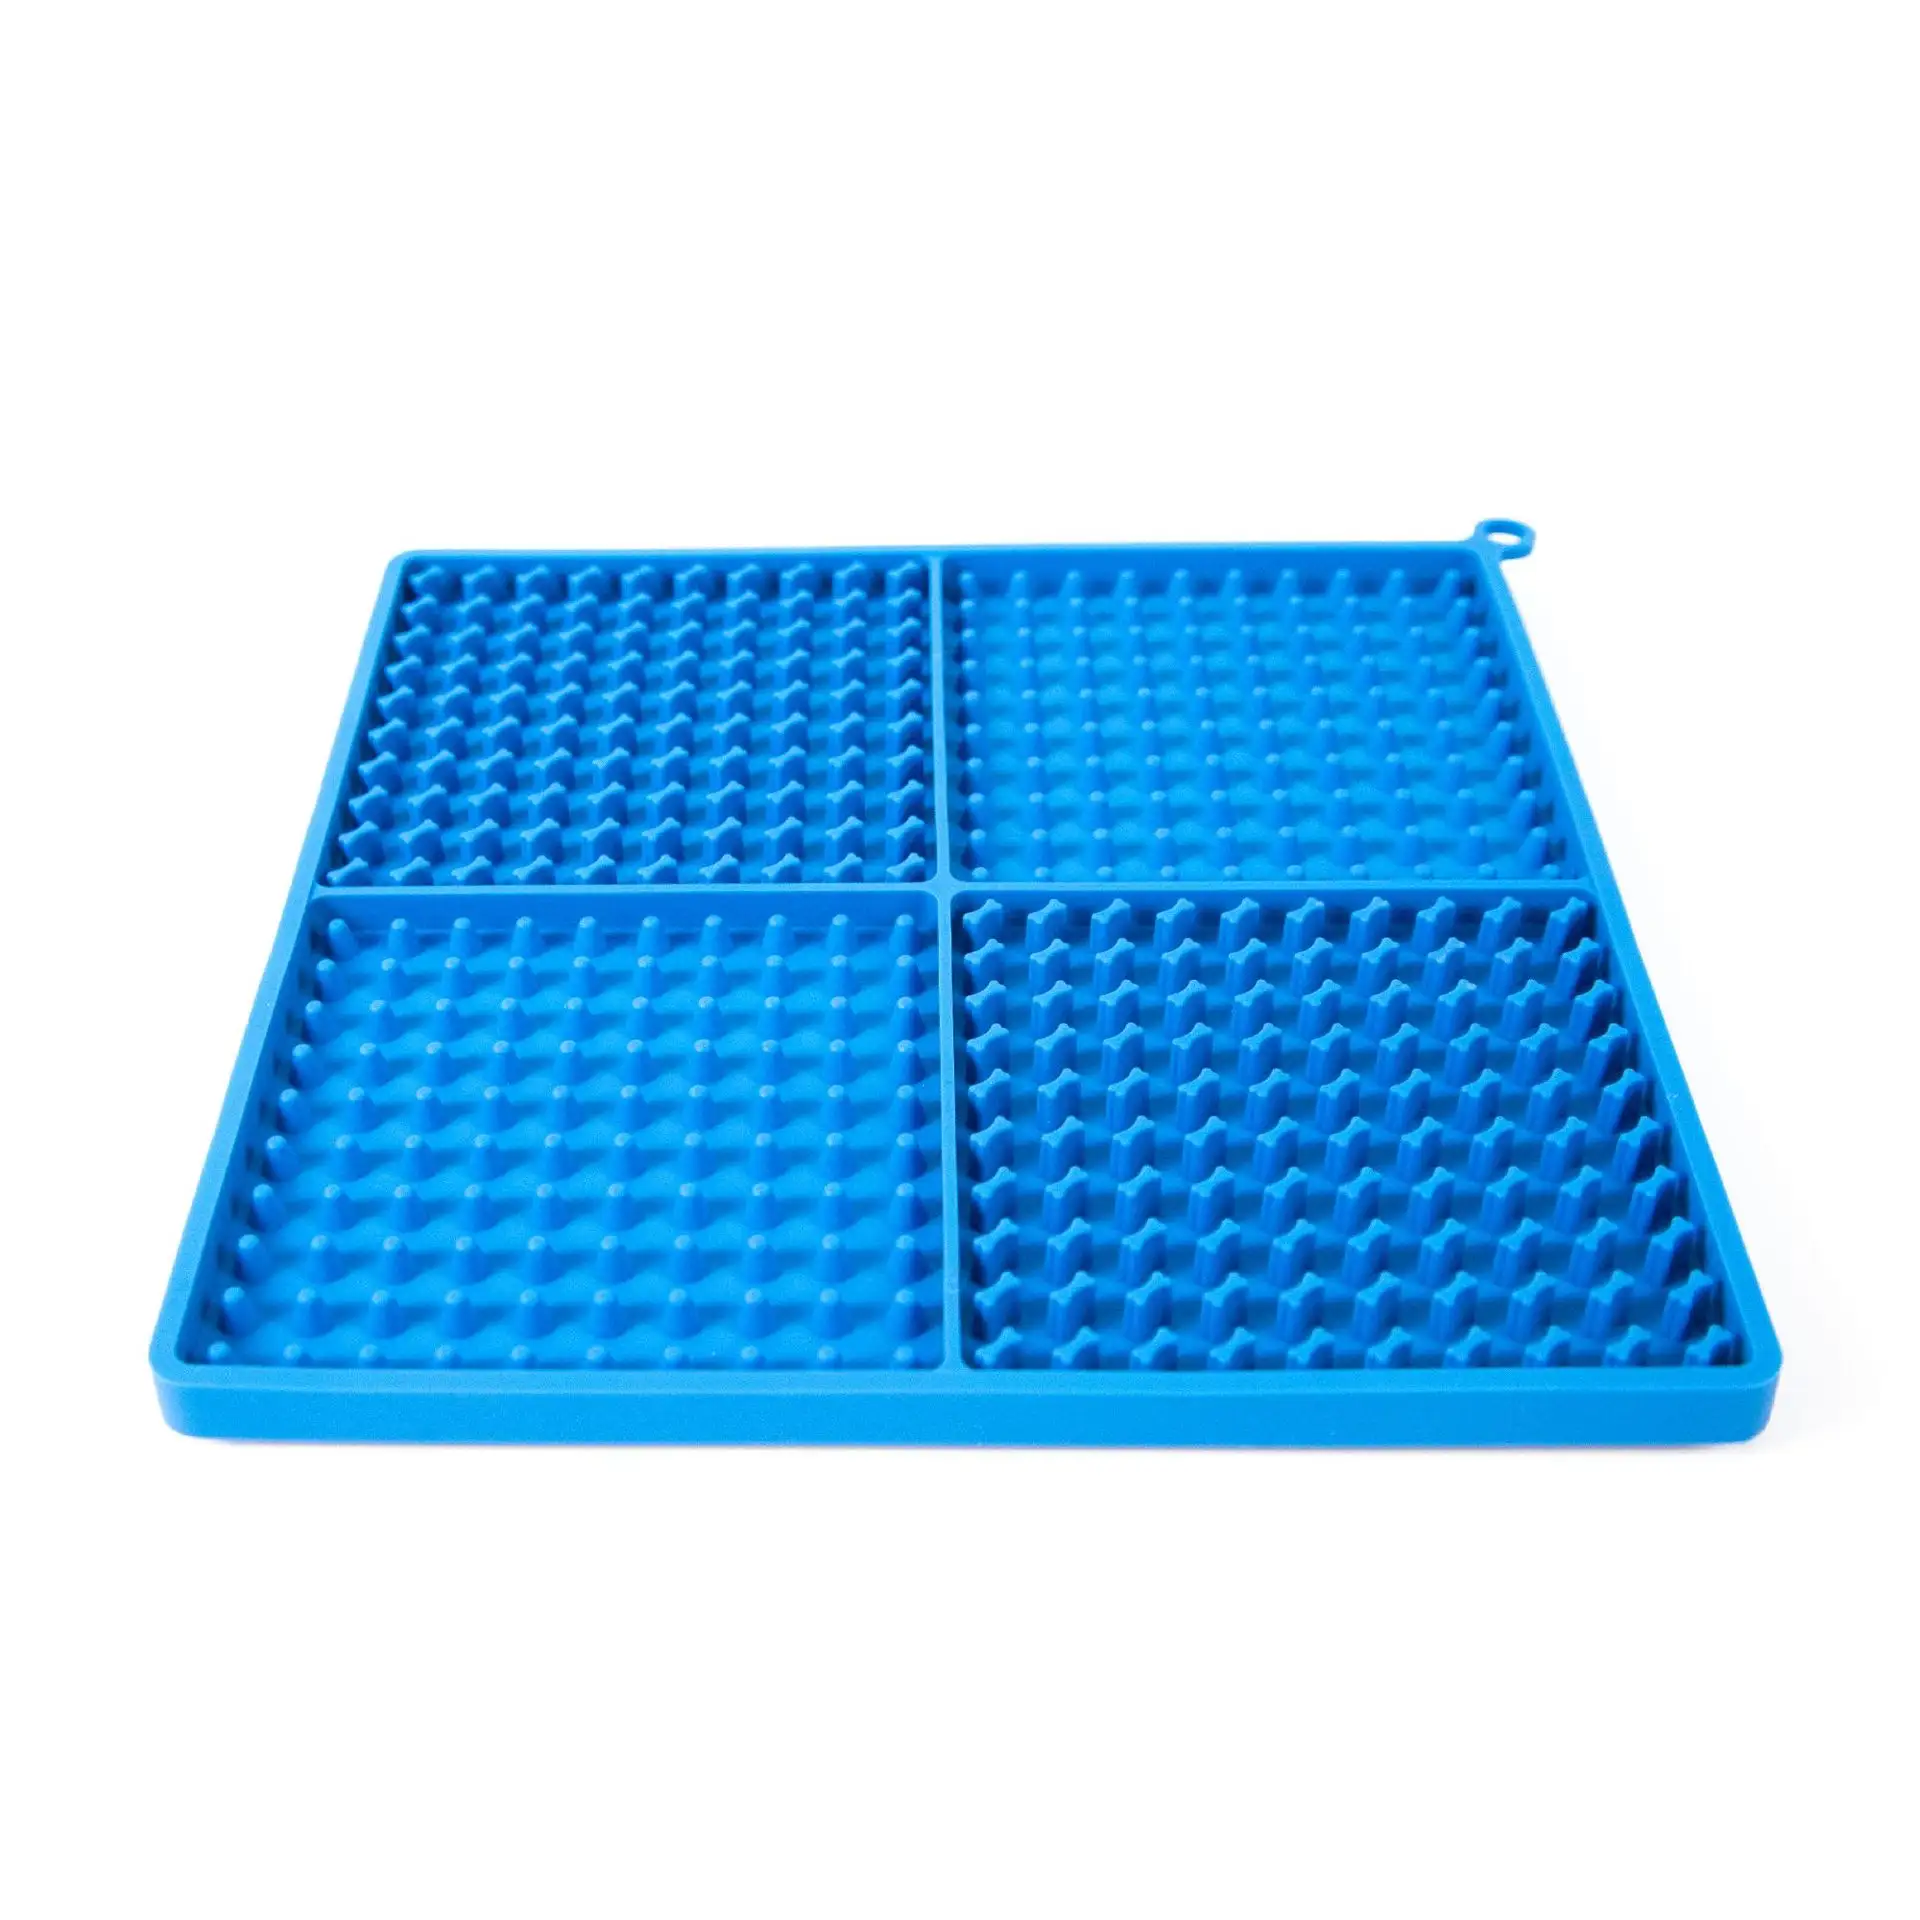 Custom Dog Food Mat Silicone Grooming Anxiety Wash Buddy Dog Training Slow Feeder Pad Licking Mat With Super Suction Cups